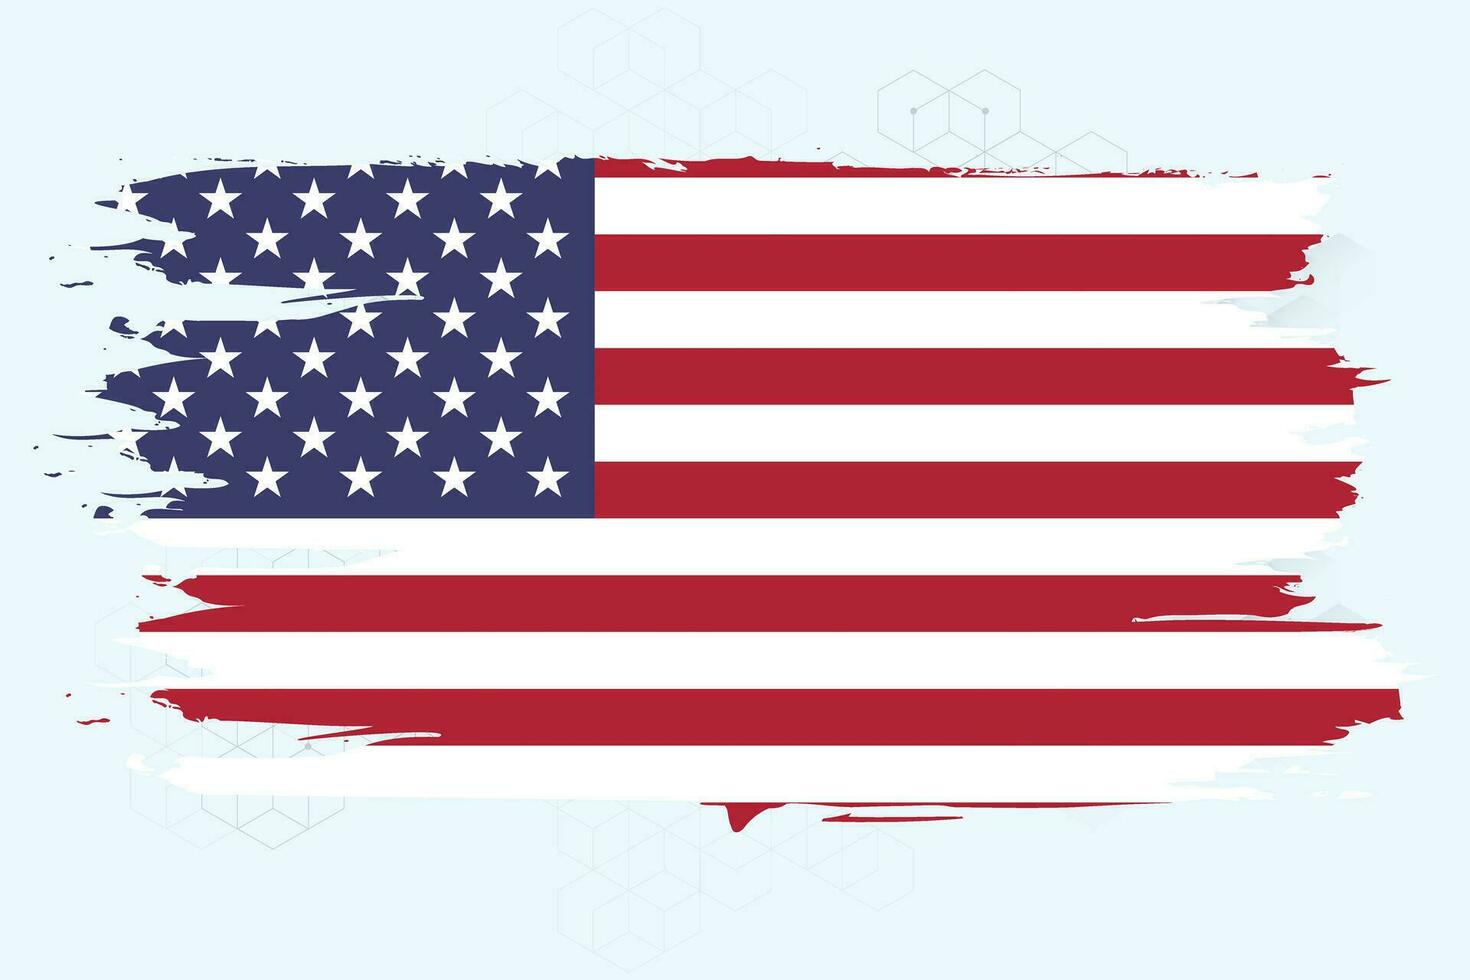 American Flag Silhouette, grunge USA flag set vector, grunge, flag, silhouette, independence, July, 4th of July, 4th July, flag silhouette vector